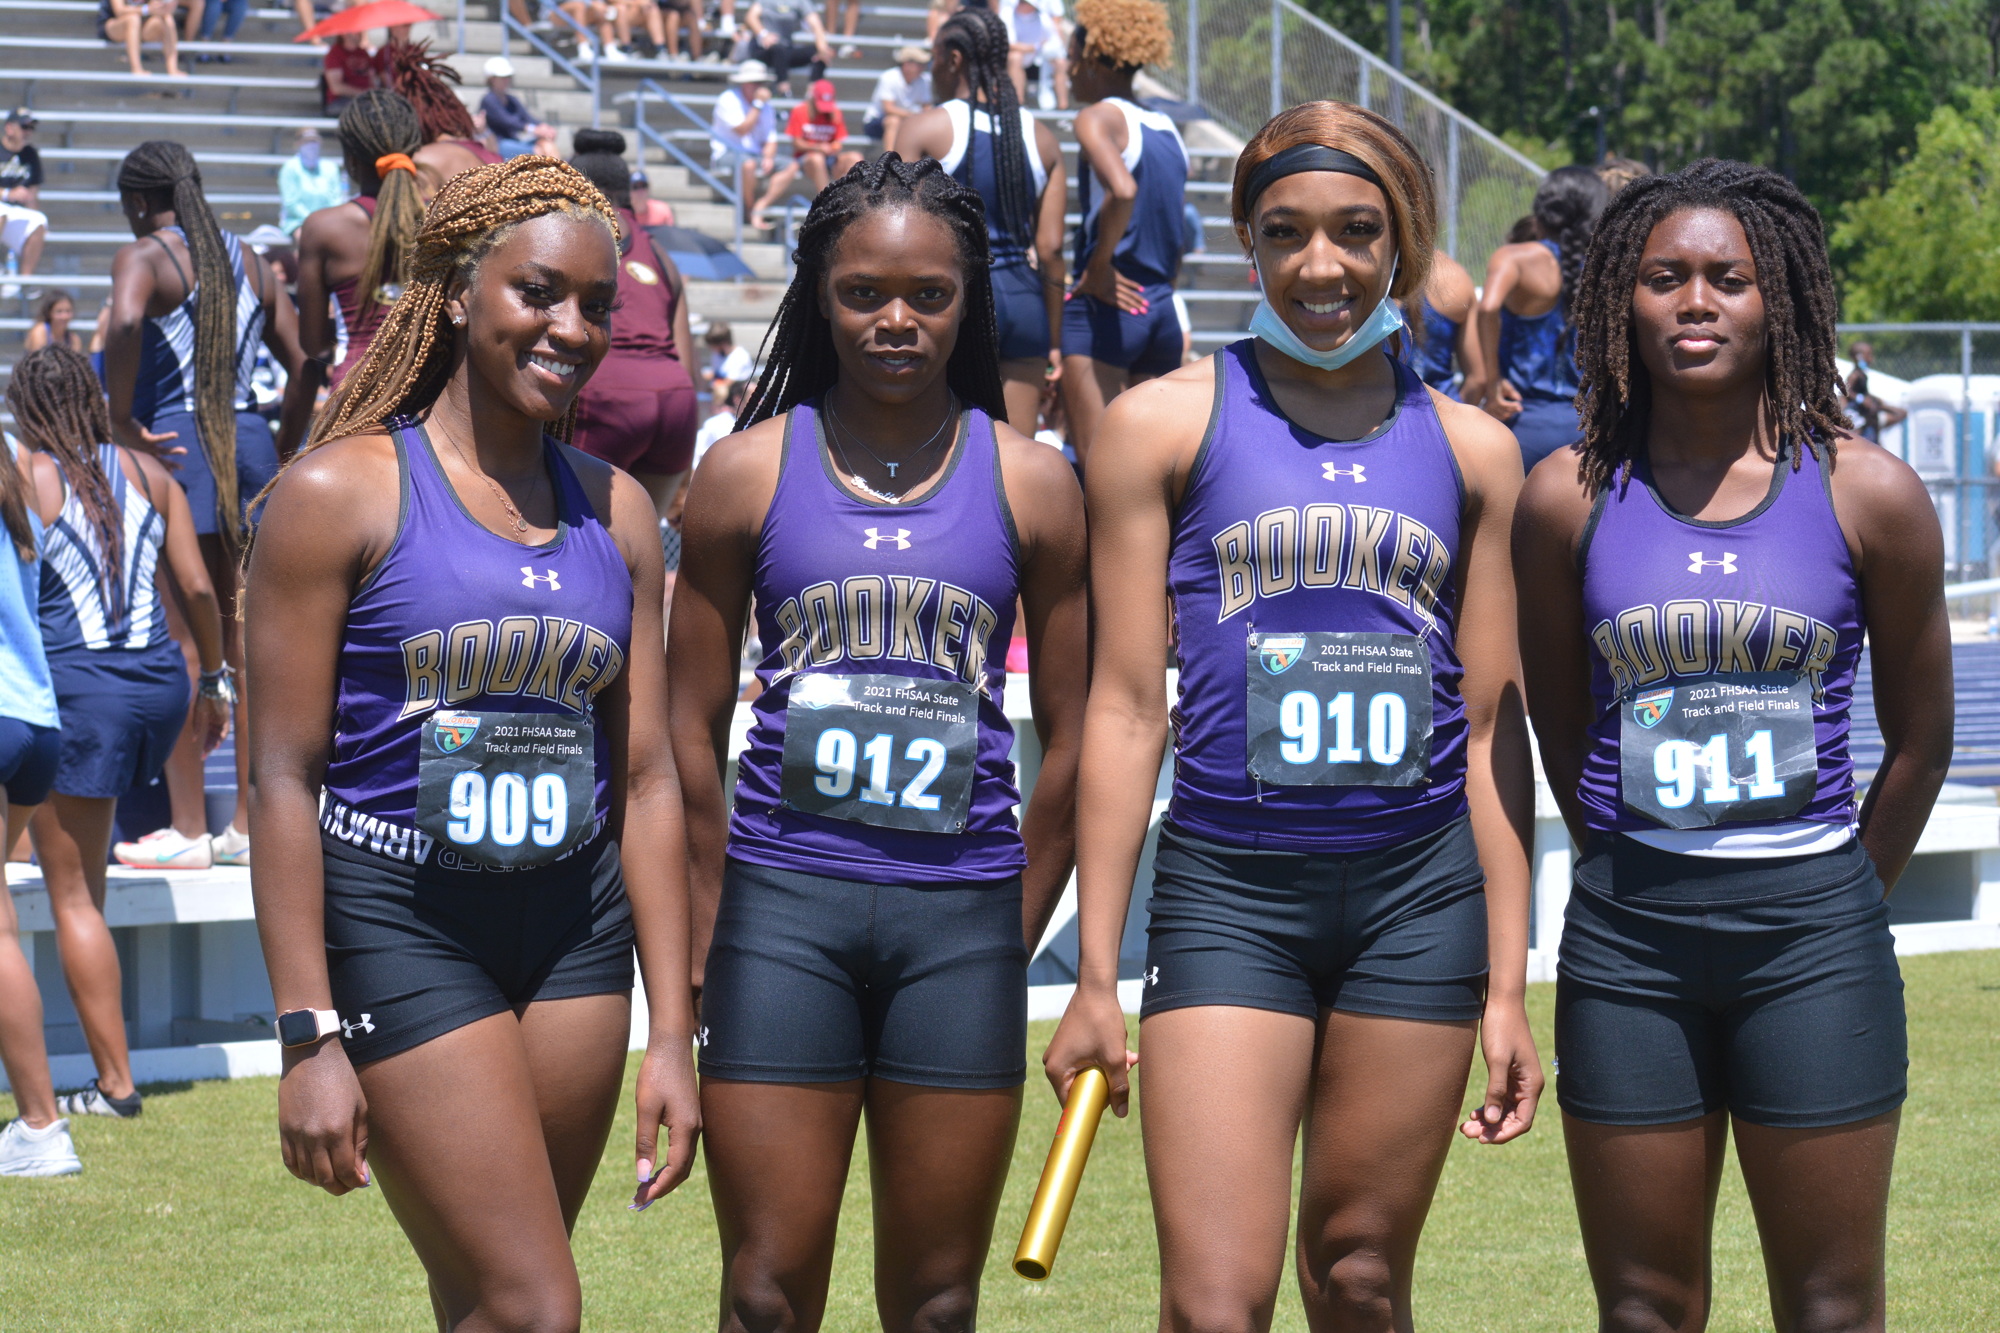 Booker High's Raja Arrington, Terrietta Smith, Dominique Starr and Jakai Peterson finished second in the 2A 4x100 relay (49.40 seconds).